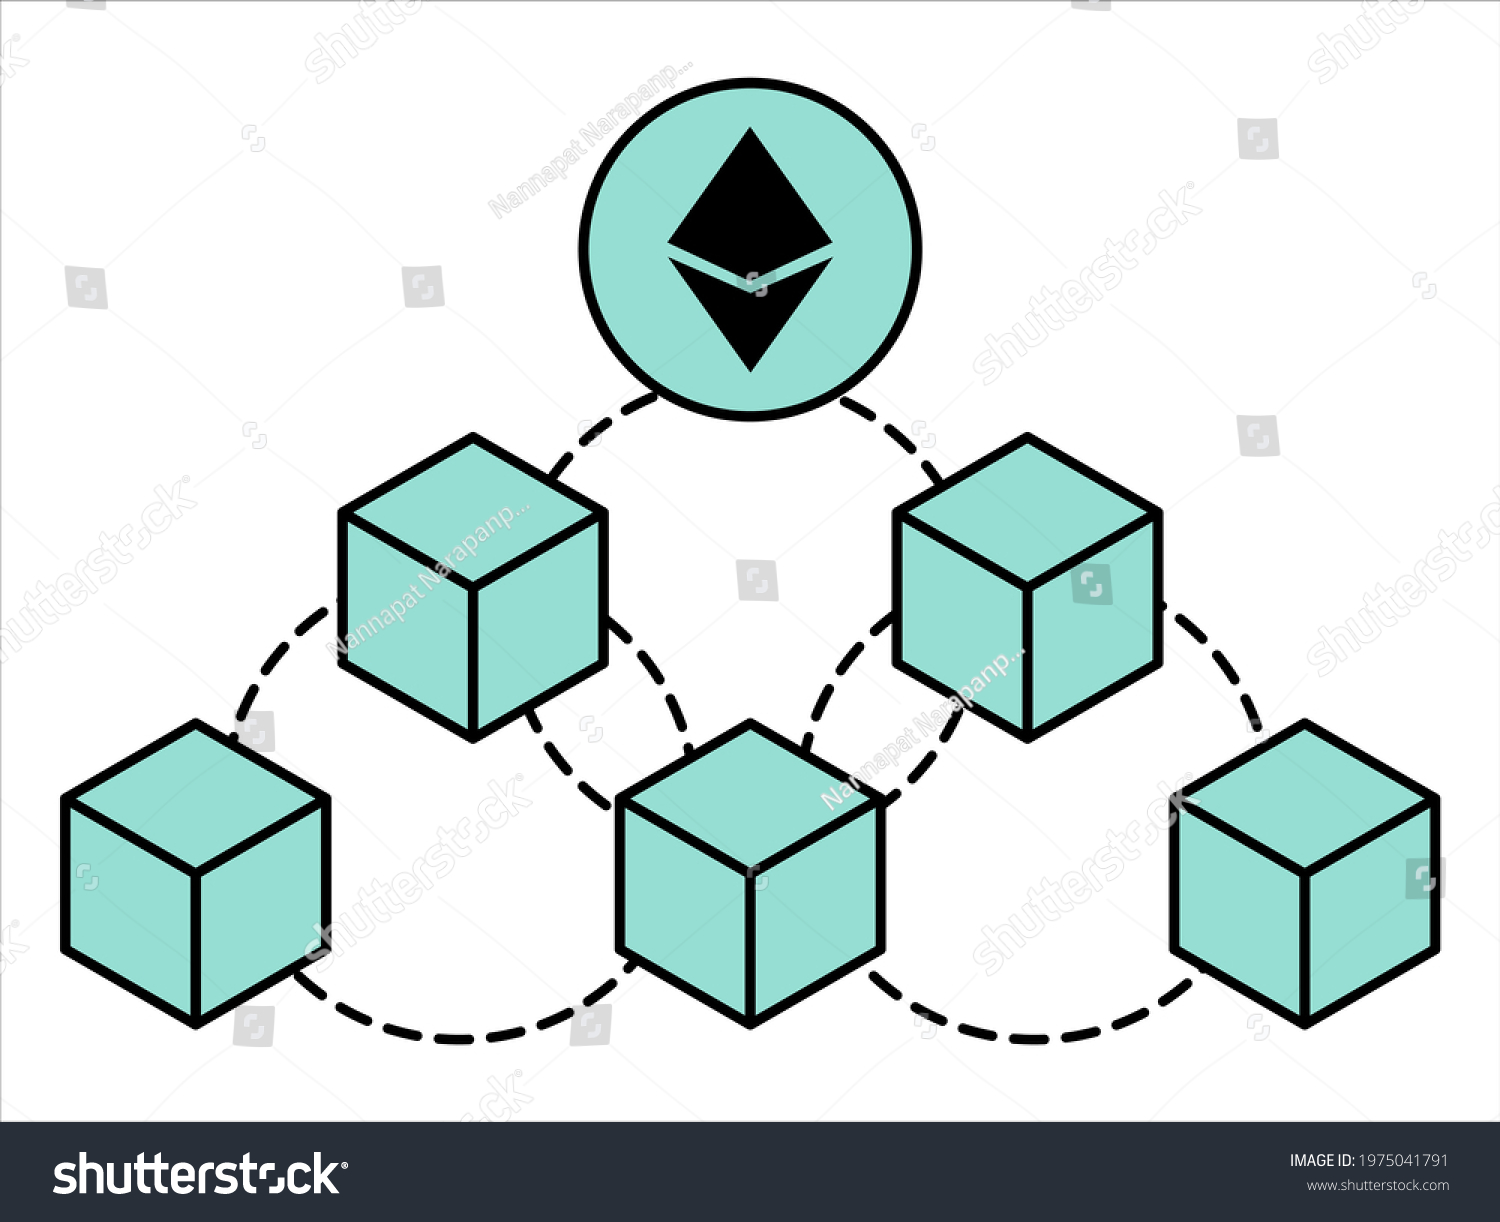 SVG of Blockchain technology, binance chain and euthereum chain vector illustration in infographic icon style svg